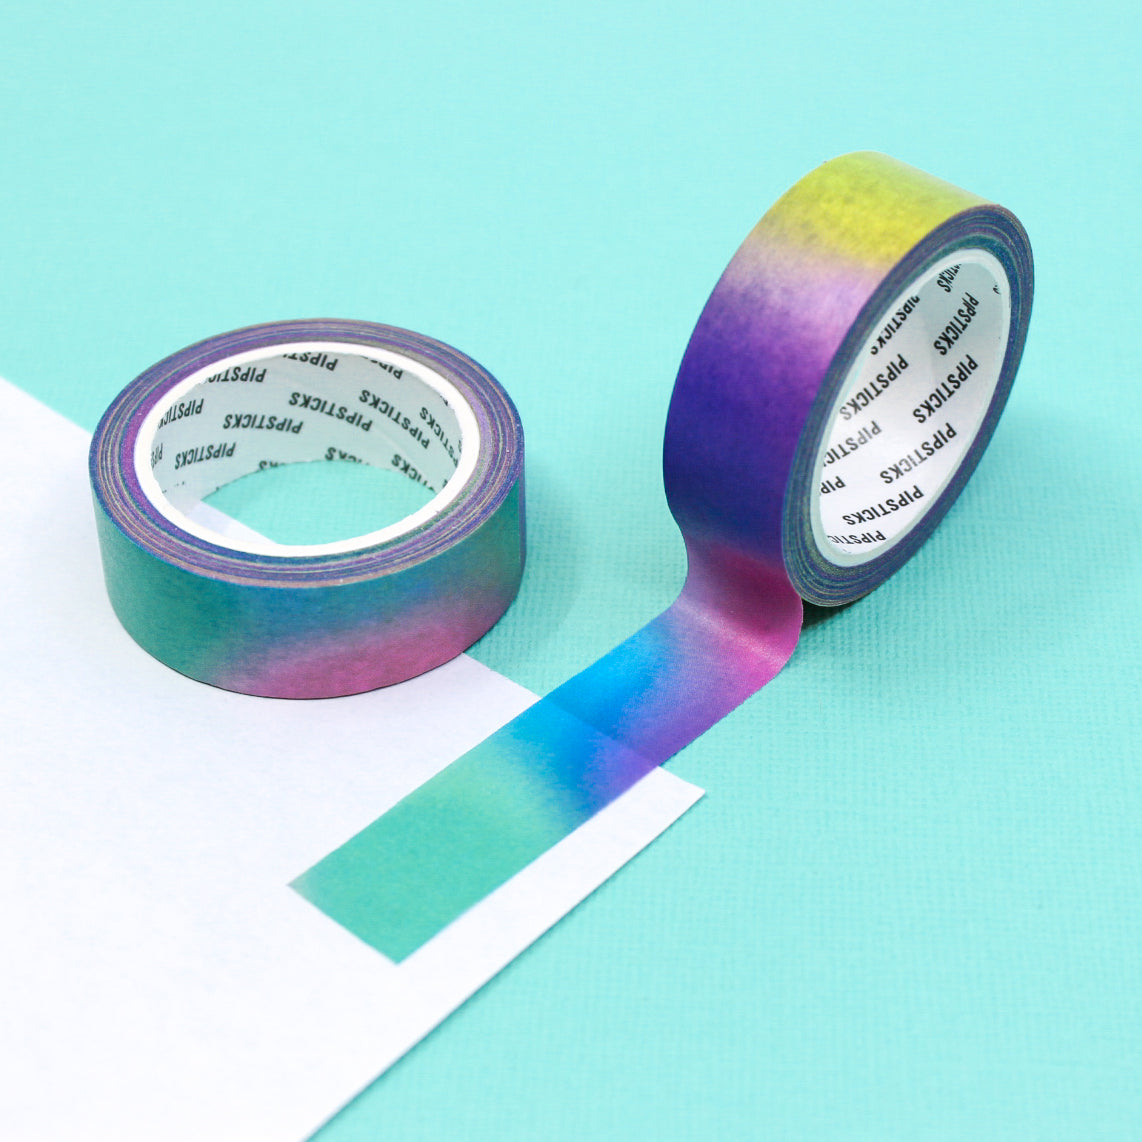 Brighten up your projects with our Ombre Rainbow Watercolor Washi Tape, featuring a vibrant and smoothly blended ombre rainbow design. Ideal for adding a splash of color and creativity to your crafts. This tape is from pipsticks and sold at BBB Supplies Craft Shop.